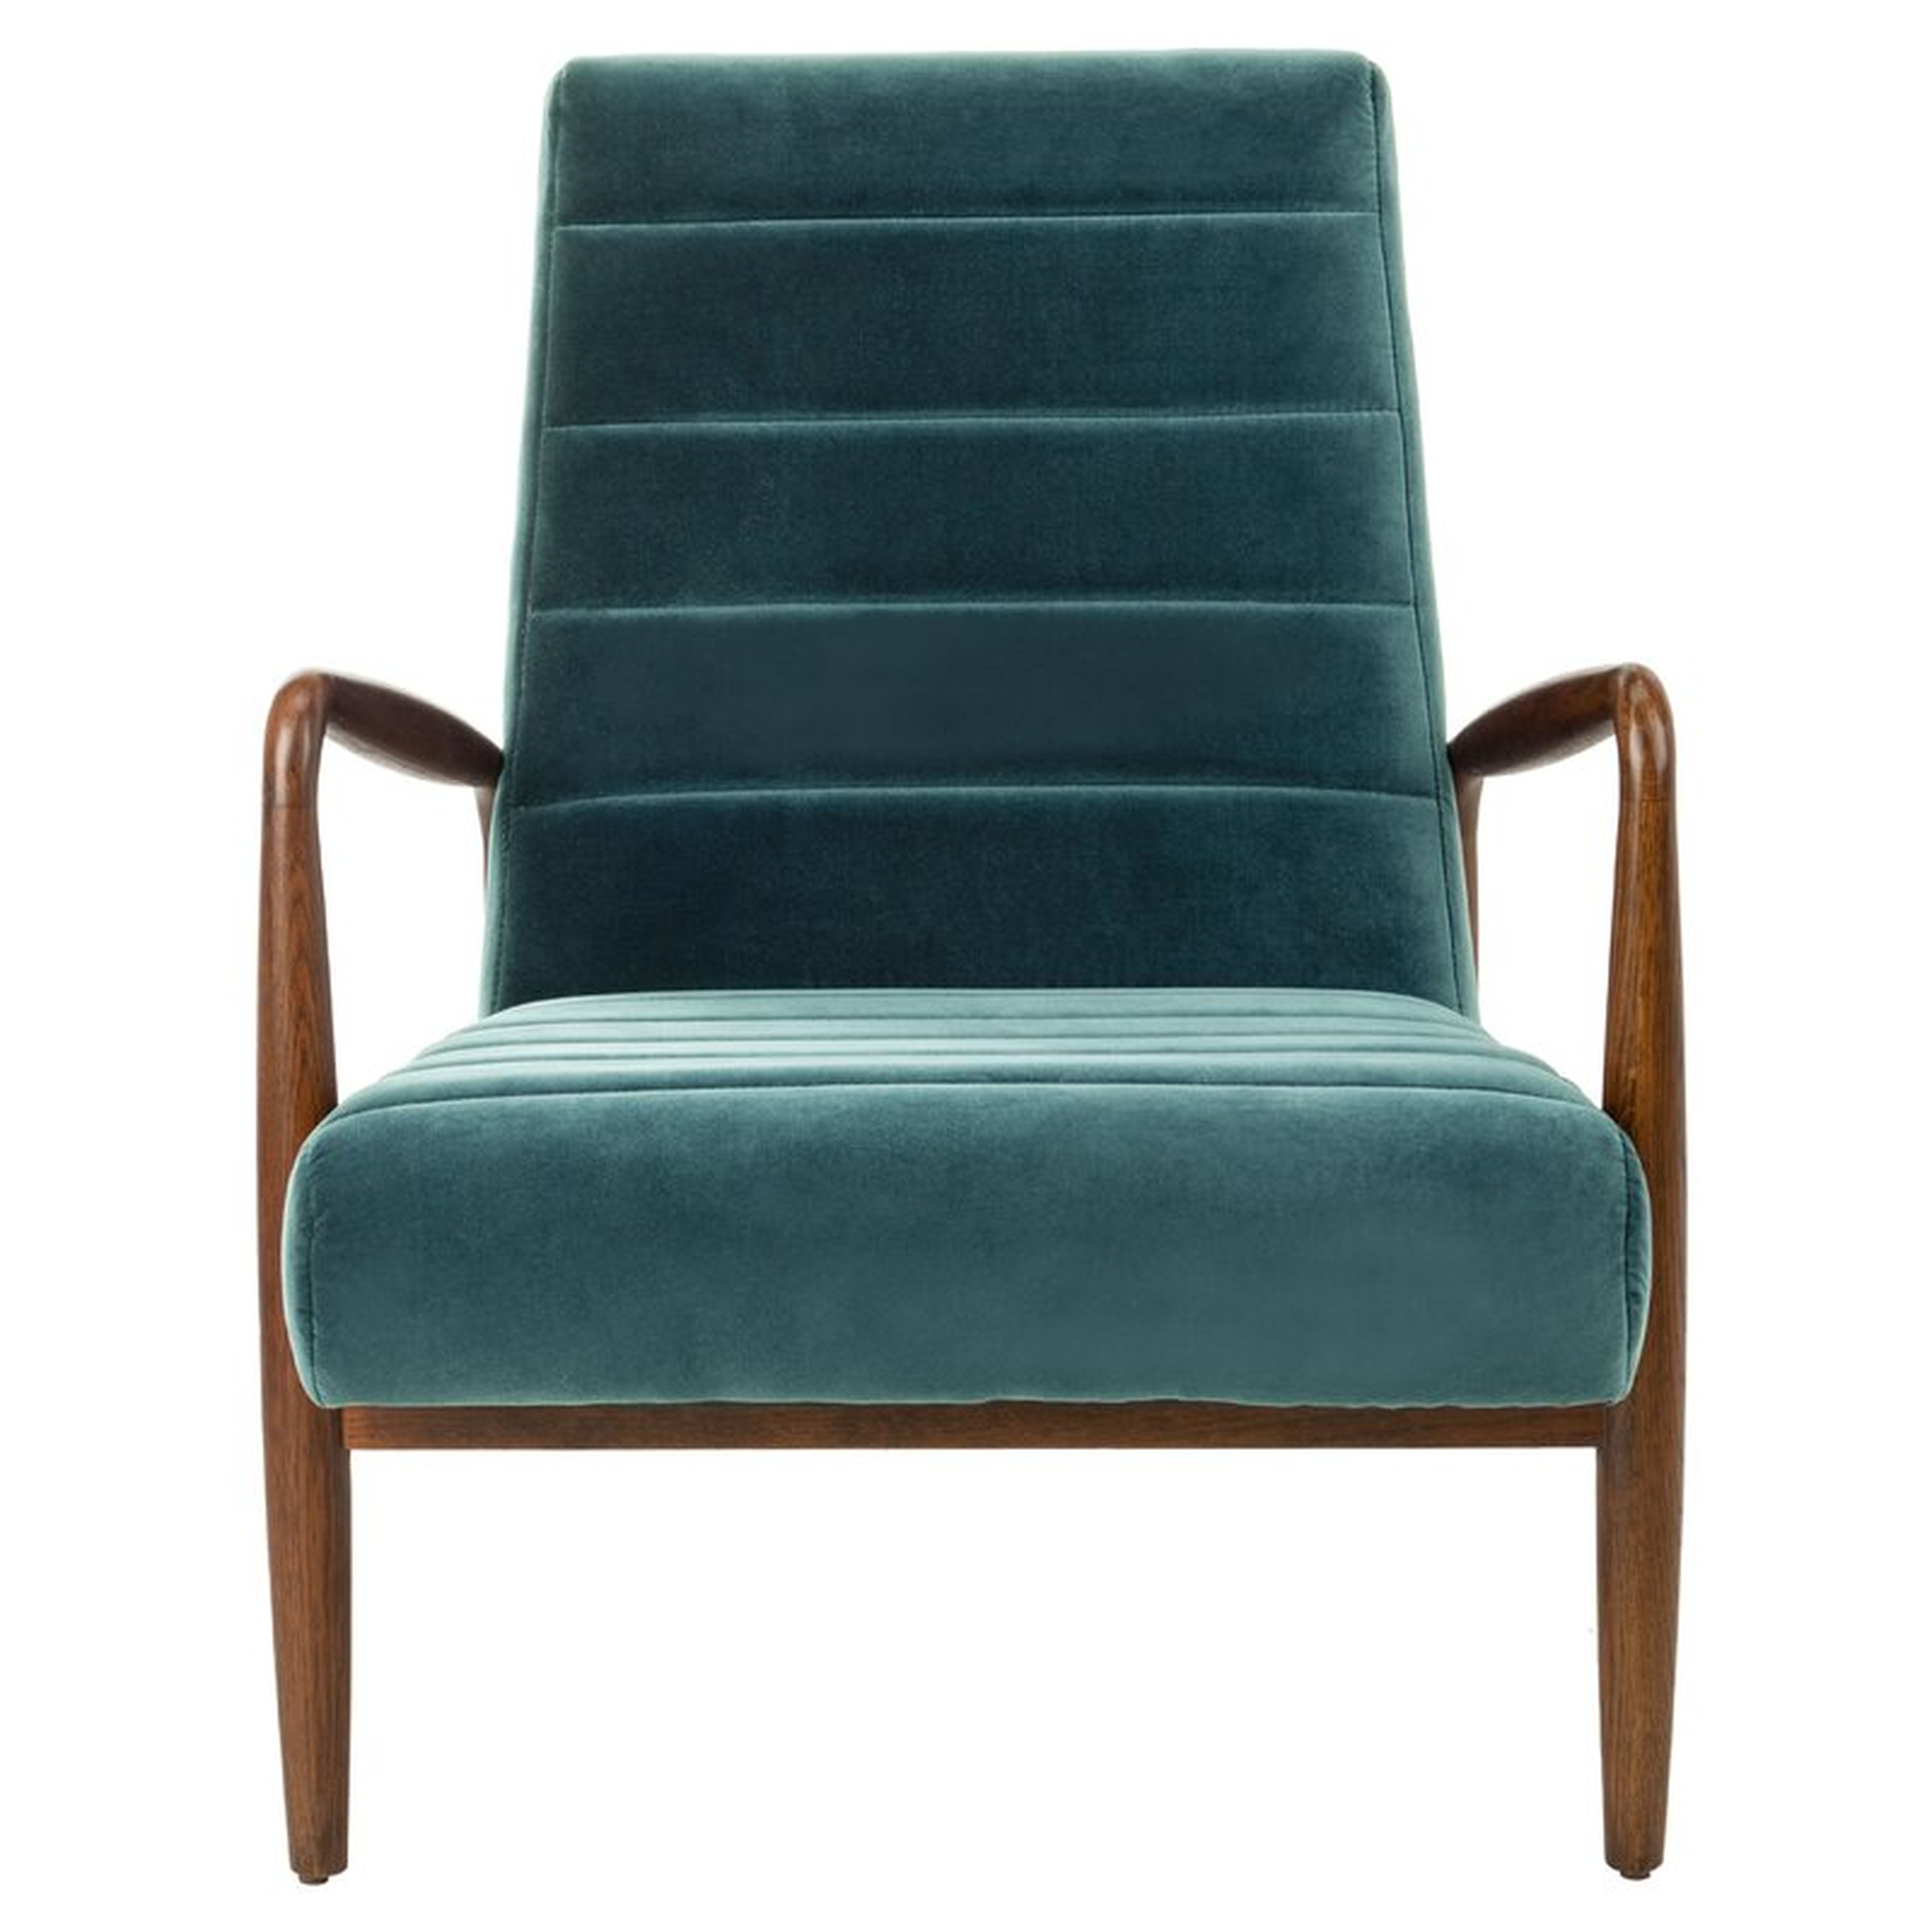 Willow Channel Tufted 22" Armchair Upholstery Color: Dark Teal - Perigold